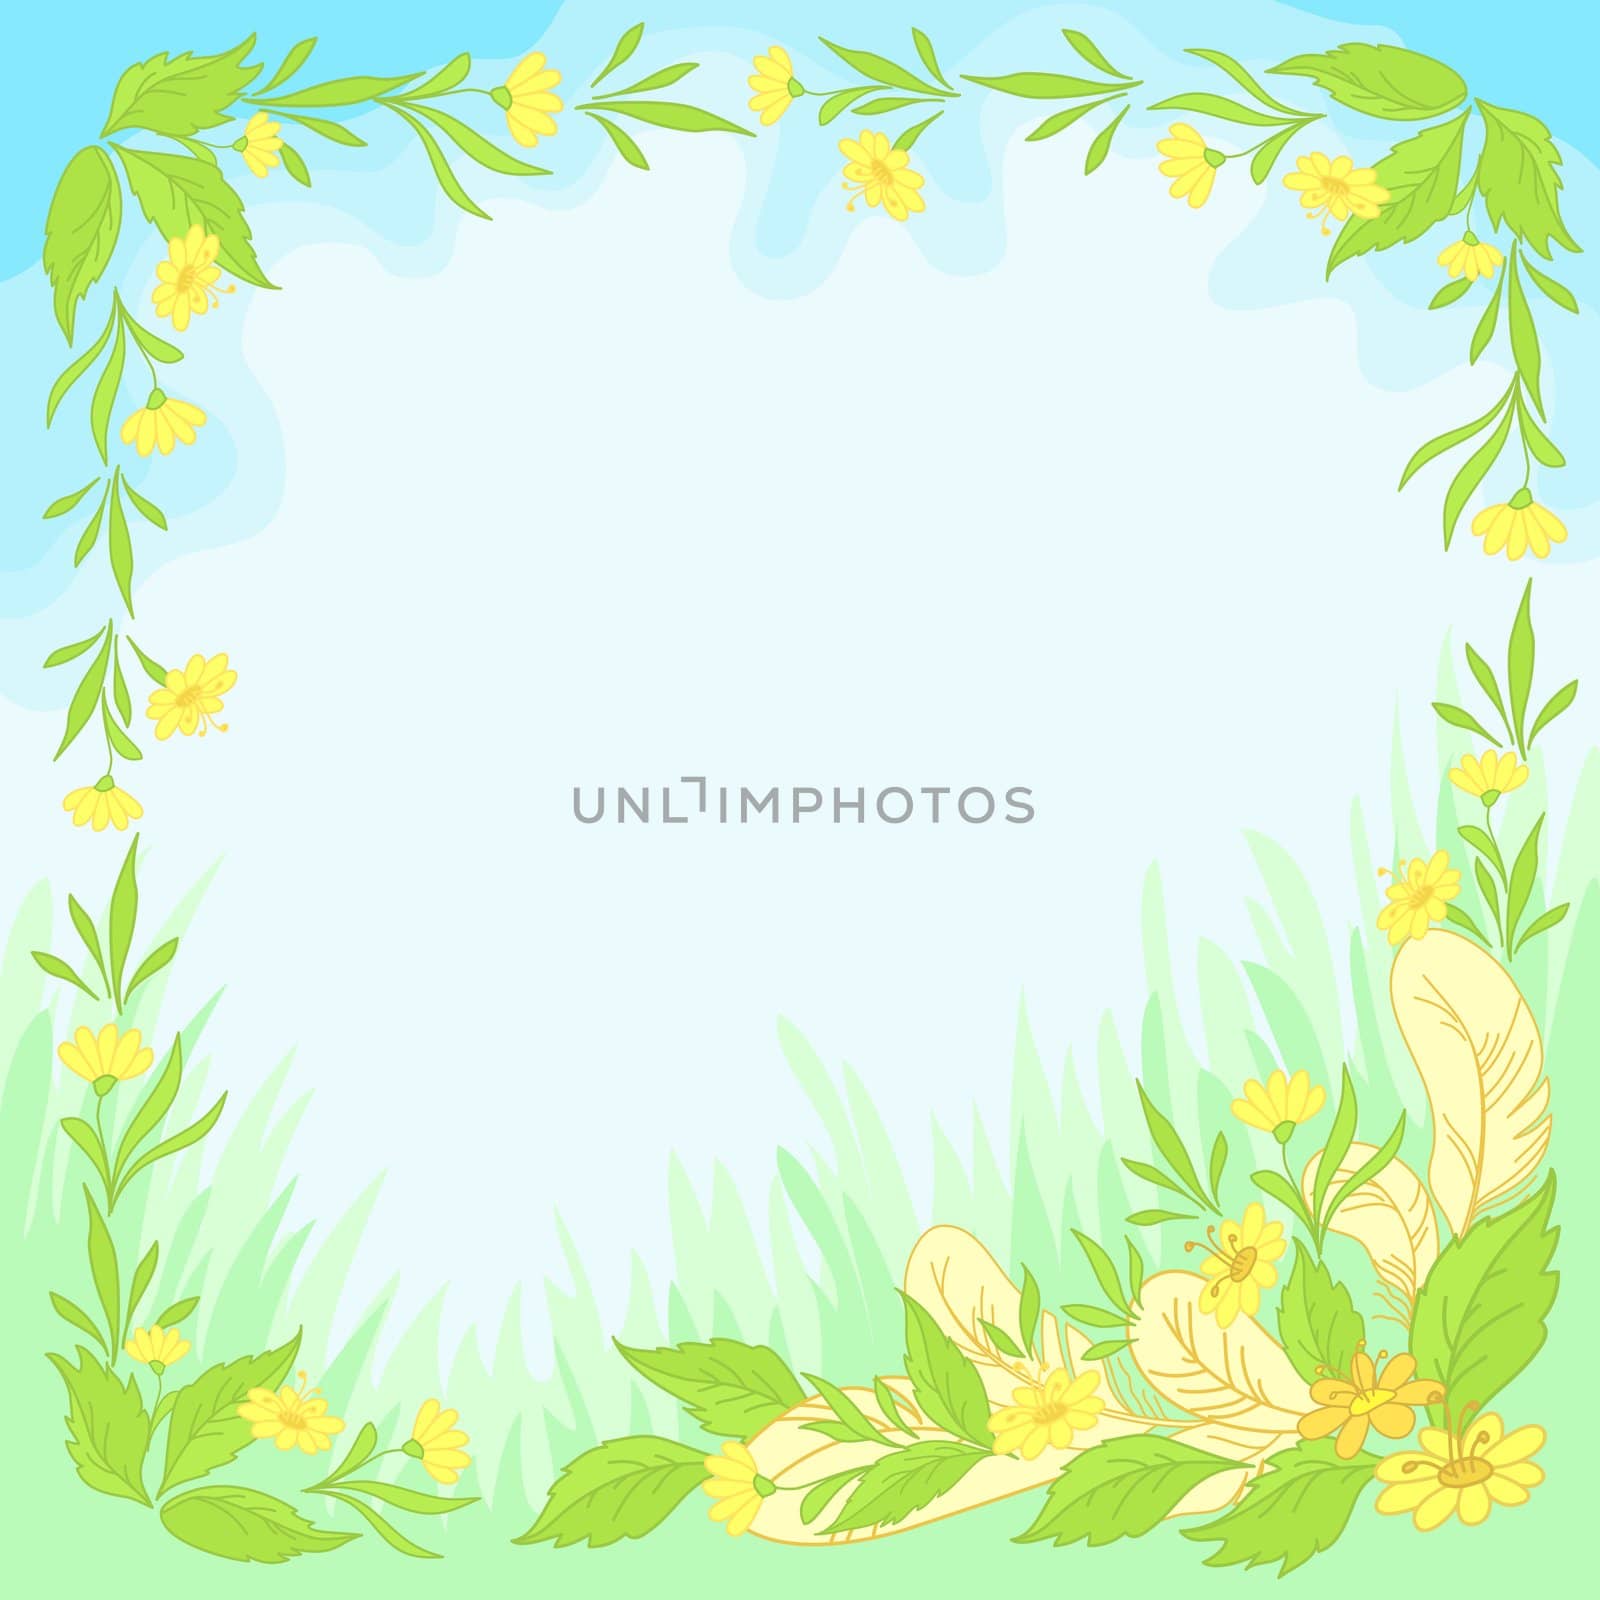 Abstract floral background: leaves, flowers and feathers on blue sky